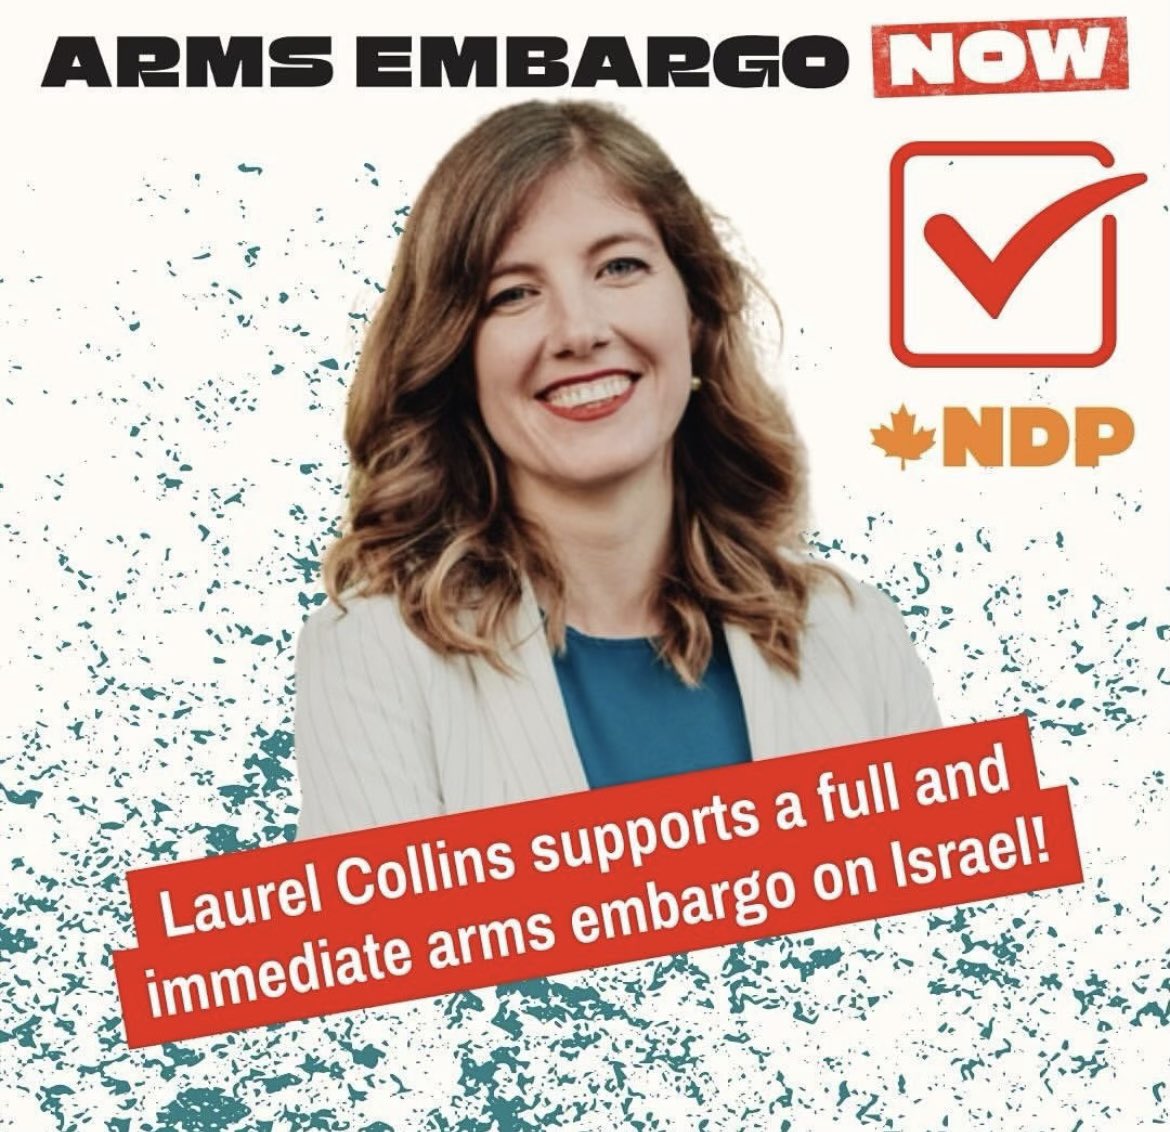 We must do everything in our power to stop genocide. This includes a two-way arms embargo, immediate sanctions, and supporting the ICC and ICJ. My @NDP colleagues and I have signed the Arms Embargo Now petition. Join this call to action at armsembargonow.ca